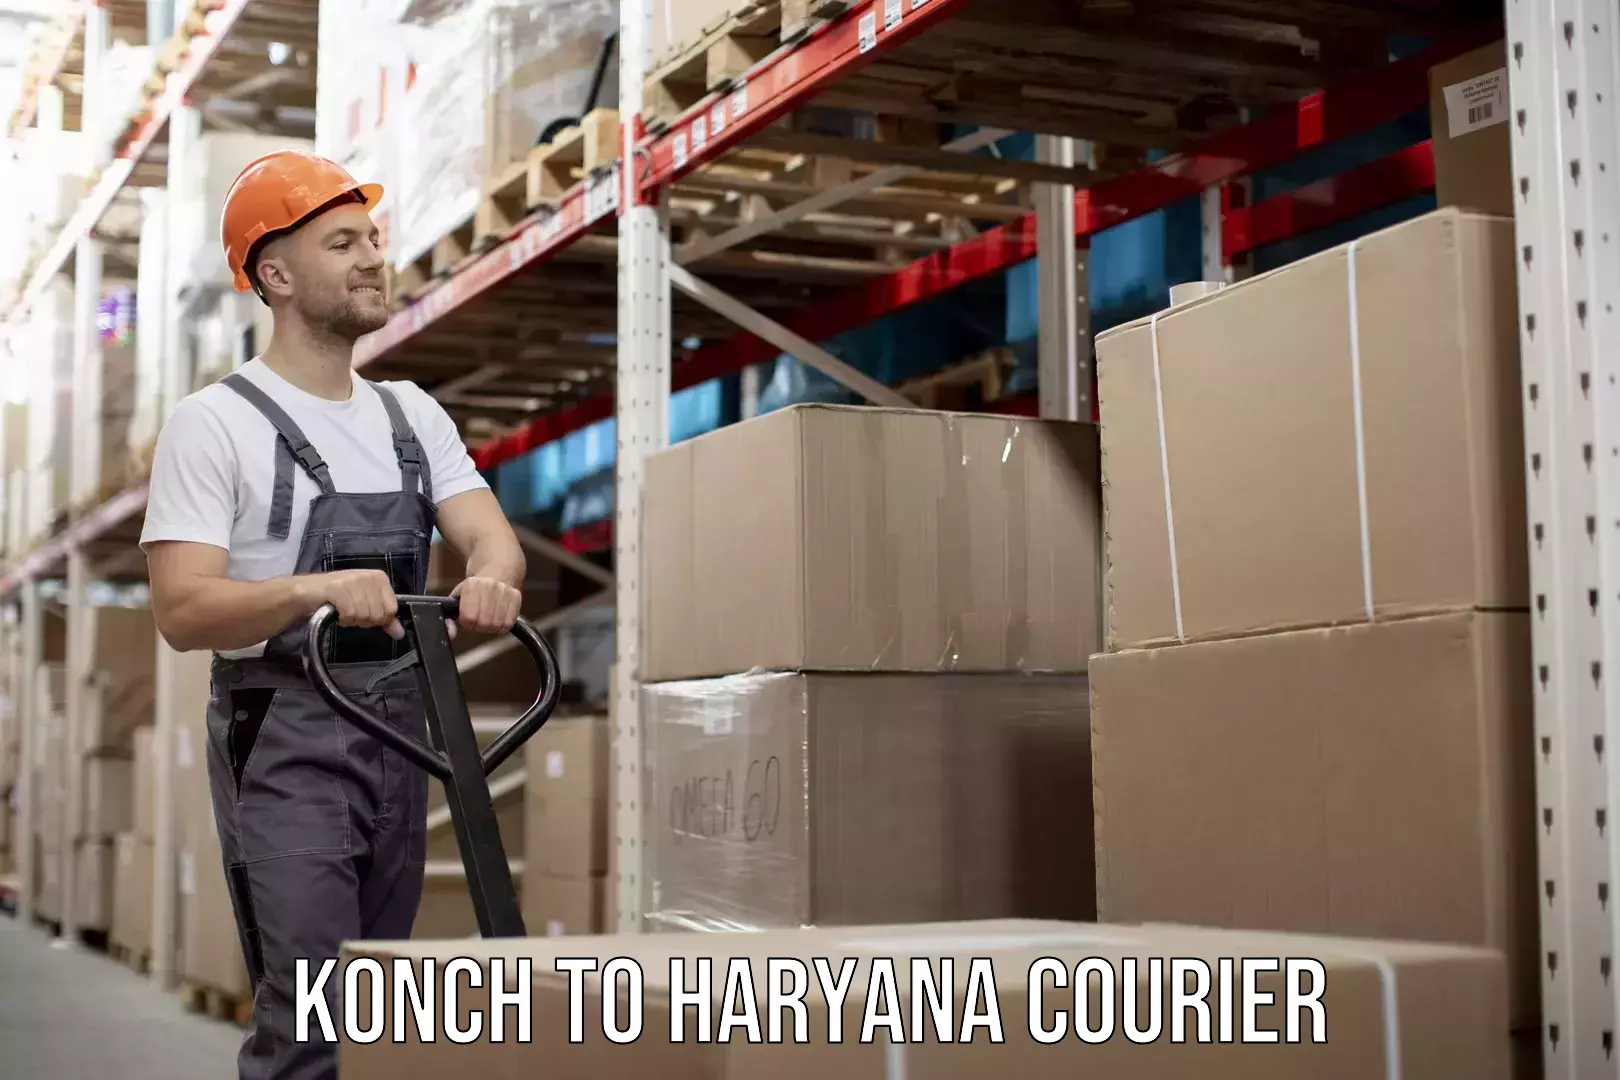 Furniture relocation experts Konch to Haryana